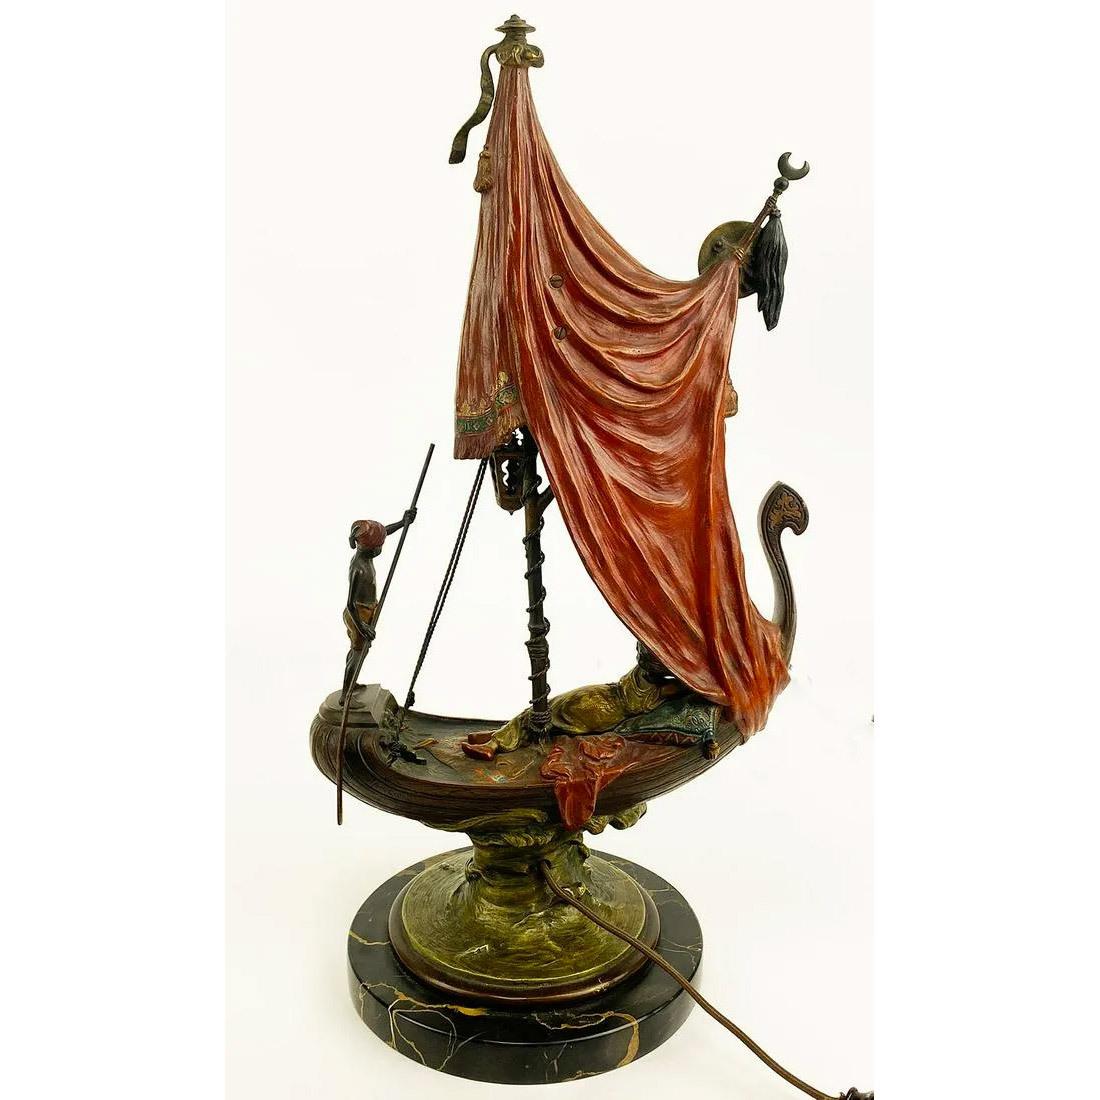 A fabulous rare cold painted bronze lamp and sculpture depicting Cleopatra sailing on her barge, marked B and inscribed Namgreb.